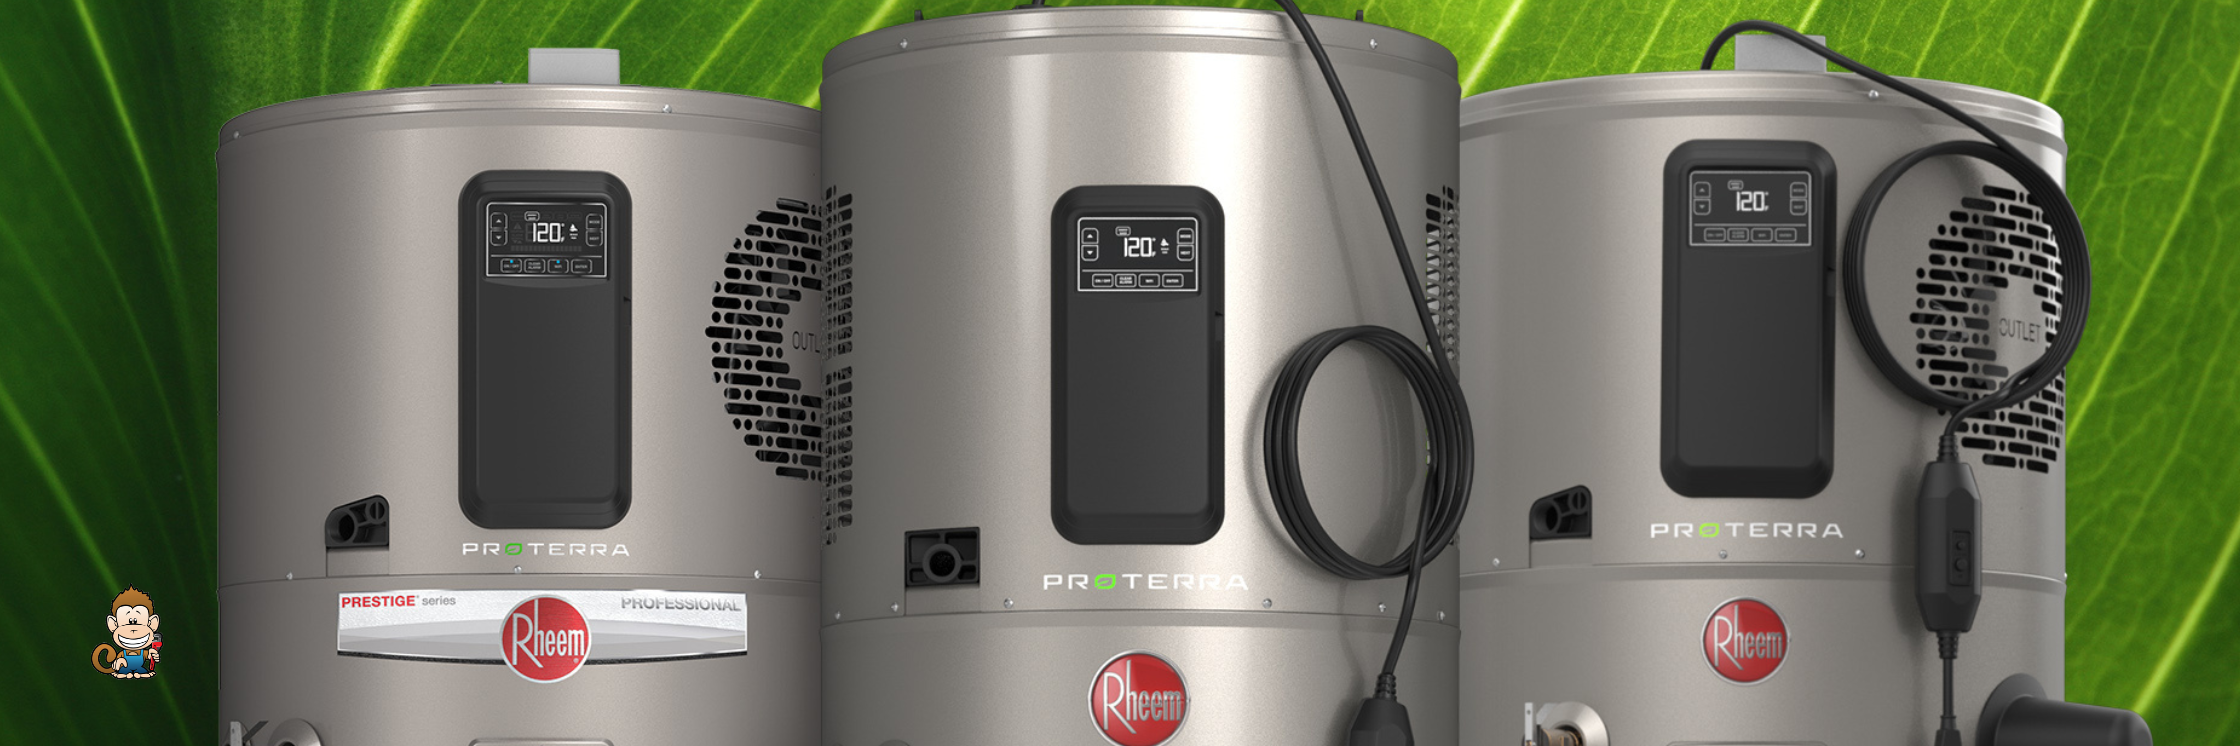 What Are Heat Pump Water Heaters?